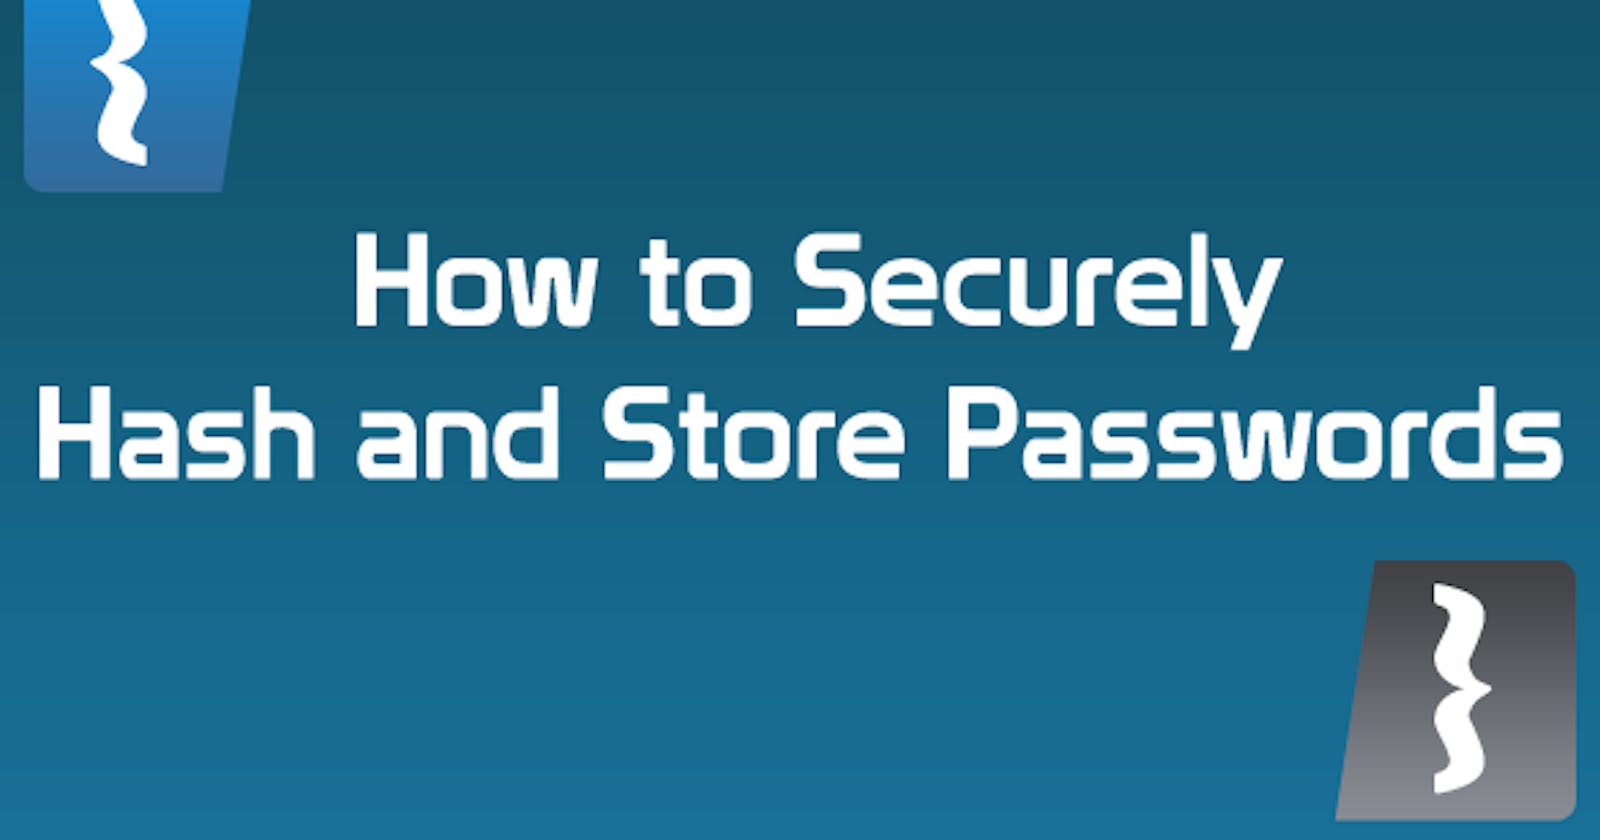 How to properly store a password in the Database